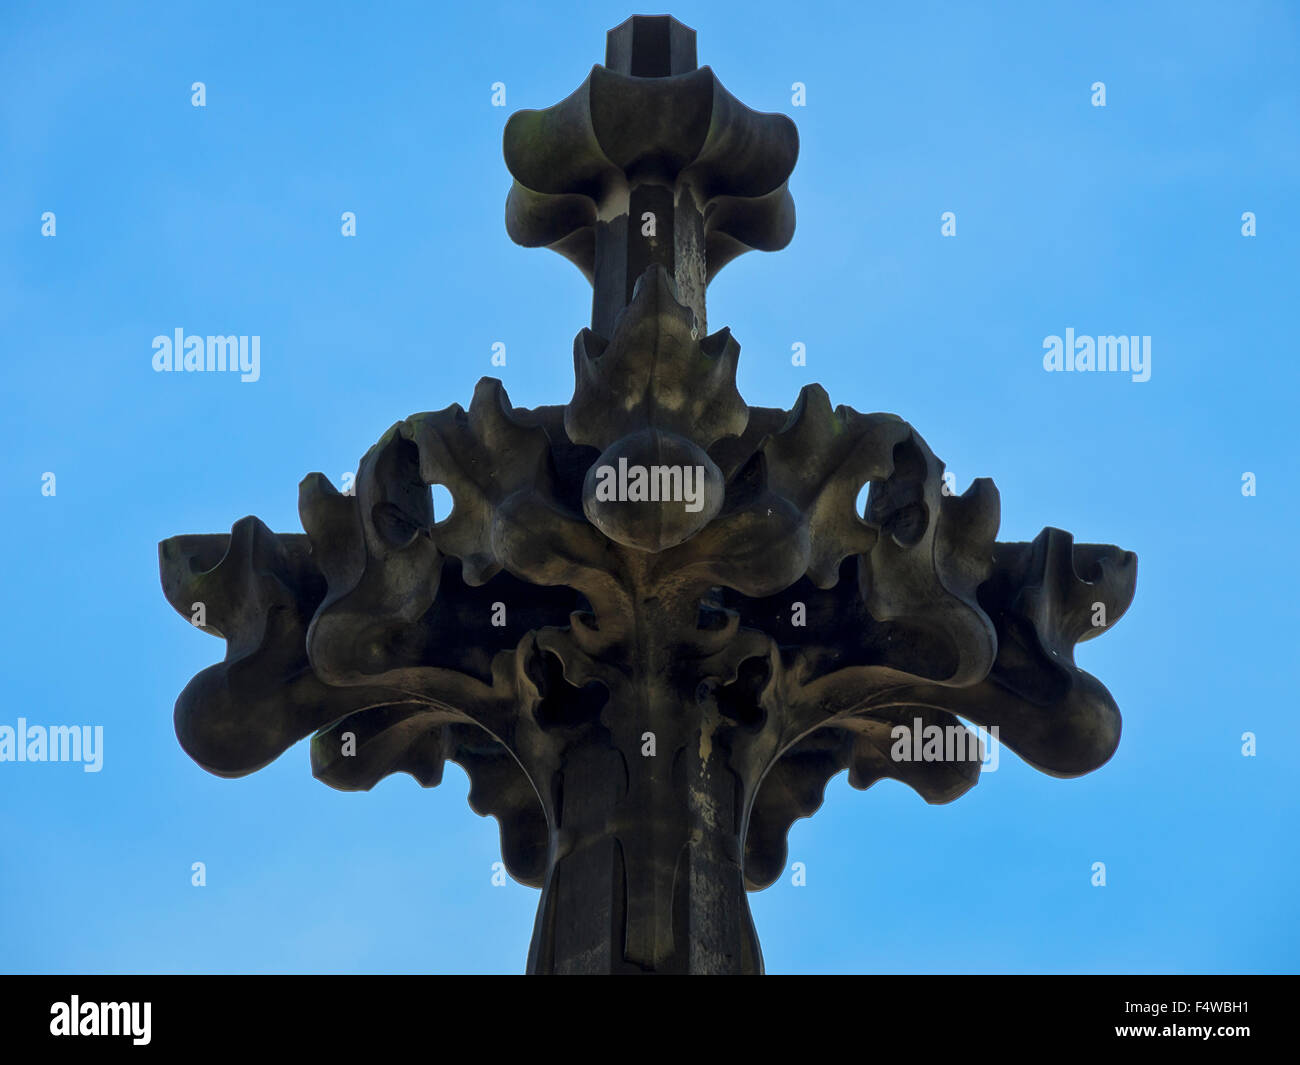 Medieval tracery on the steeple of gothic cathedral, Ulm Minster, Germany. Stock Photo